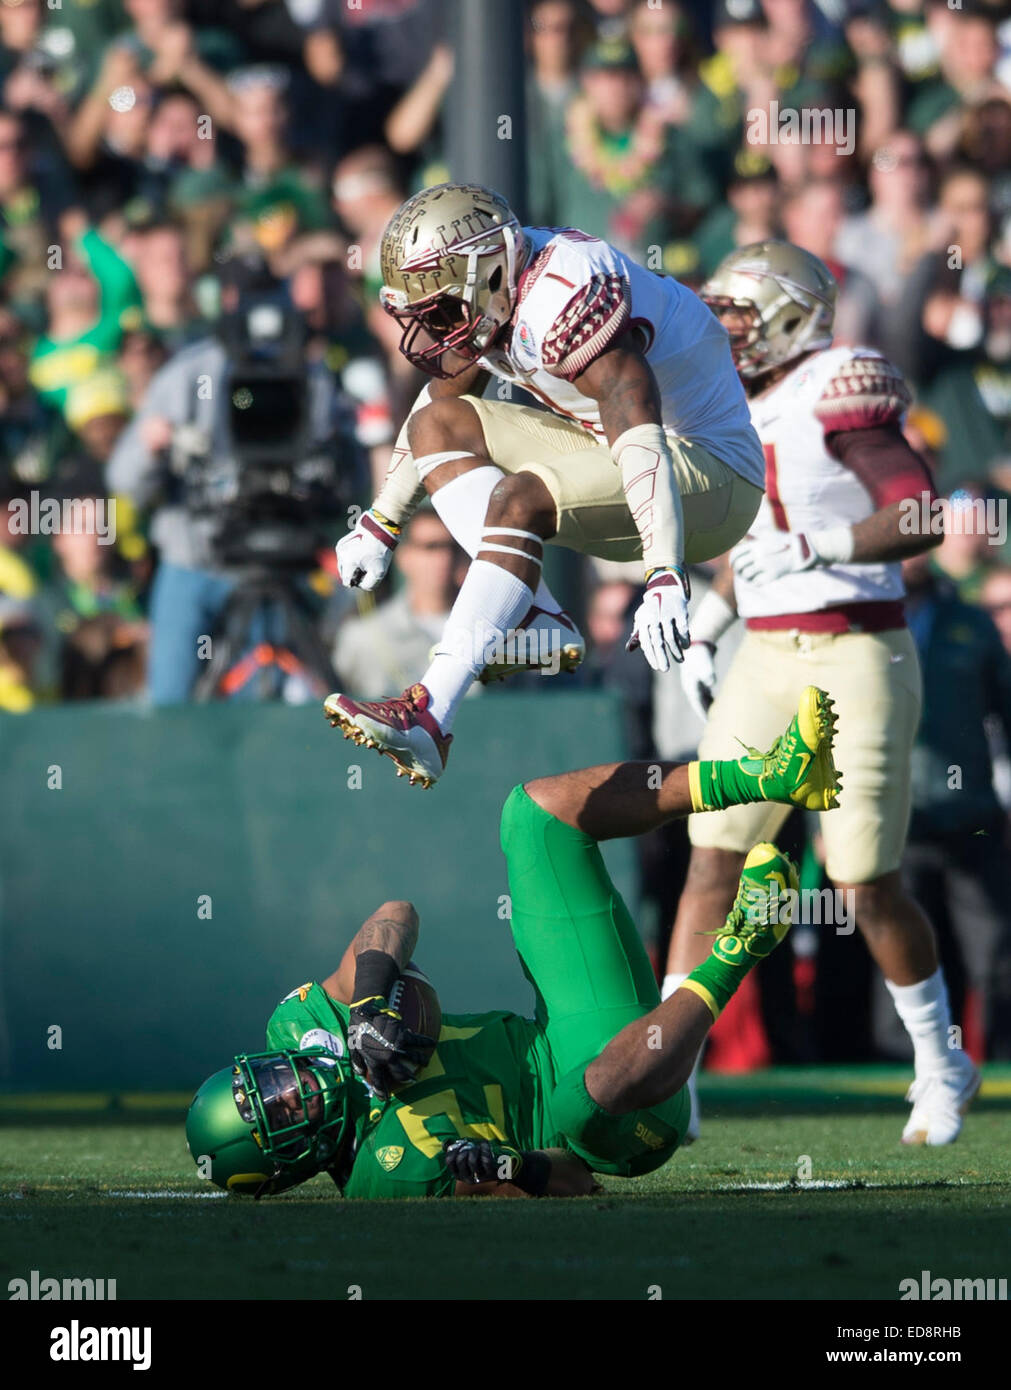 Los Angeles, USA. 1st Jan, 2015. Stephen Amoako (bottom) of Oregon Ducks falls during the 2015 Rose Bowl college football game against the Florida State Seminoles at Rose Bowl in Los Angeles, the United States, Jan. 1, 2015. Oregon Ducks won the game 59-20. Credit:  Yang Lei/Xinhua/Alamy Live News Stock Photo